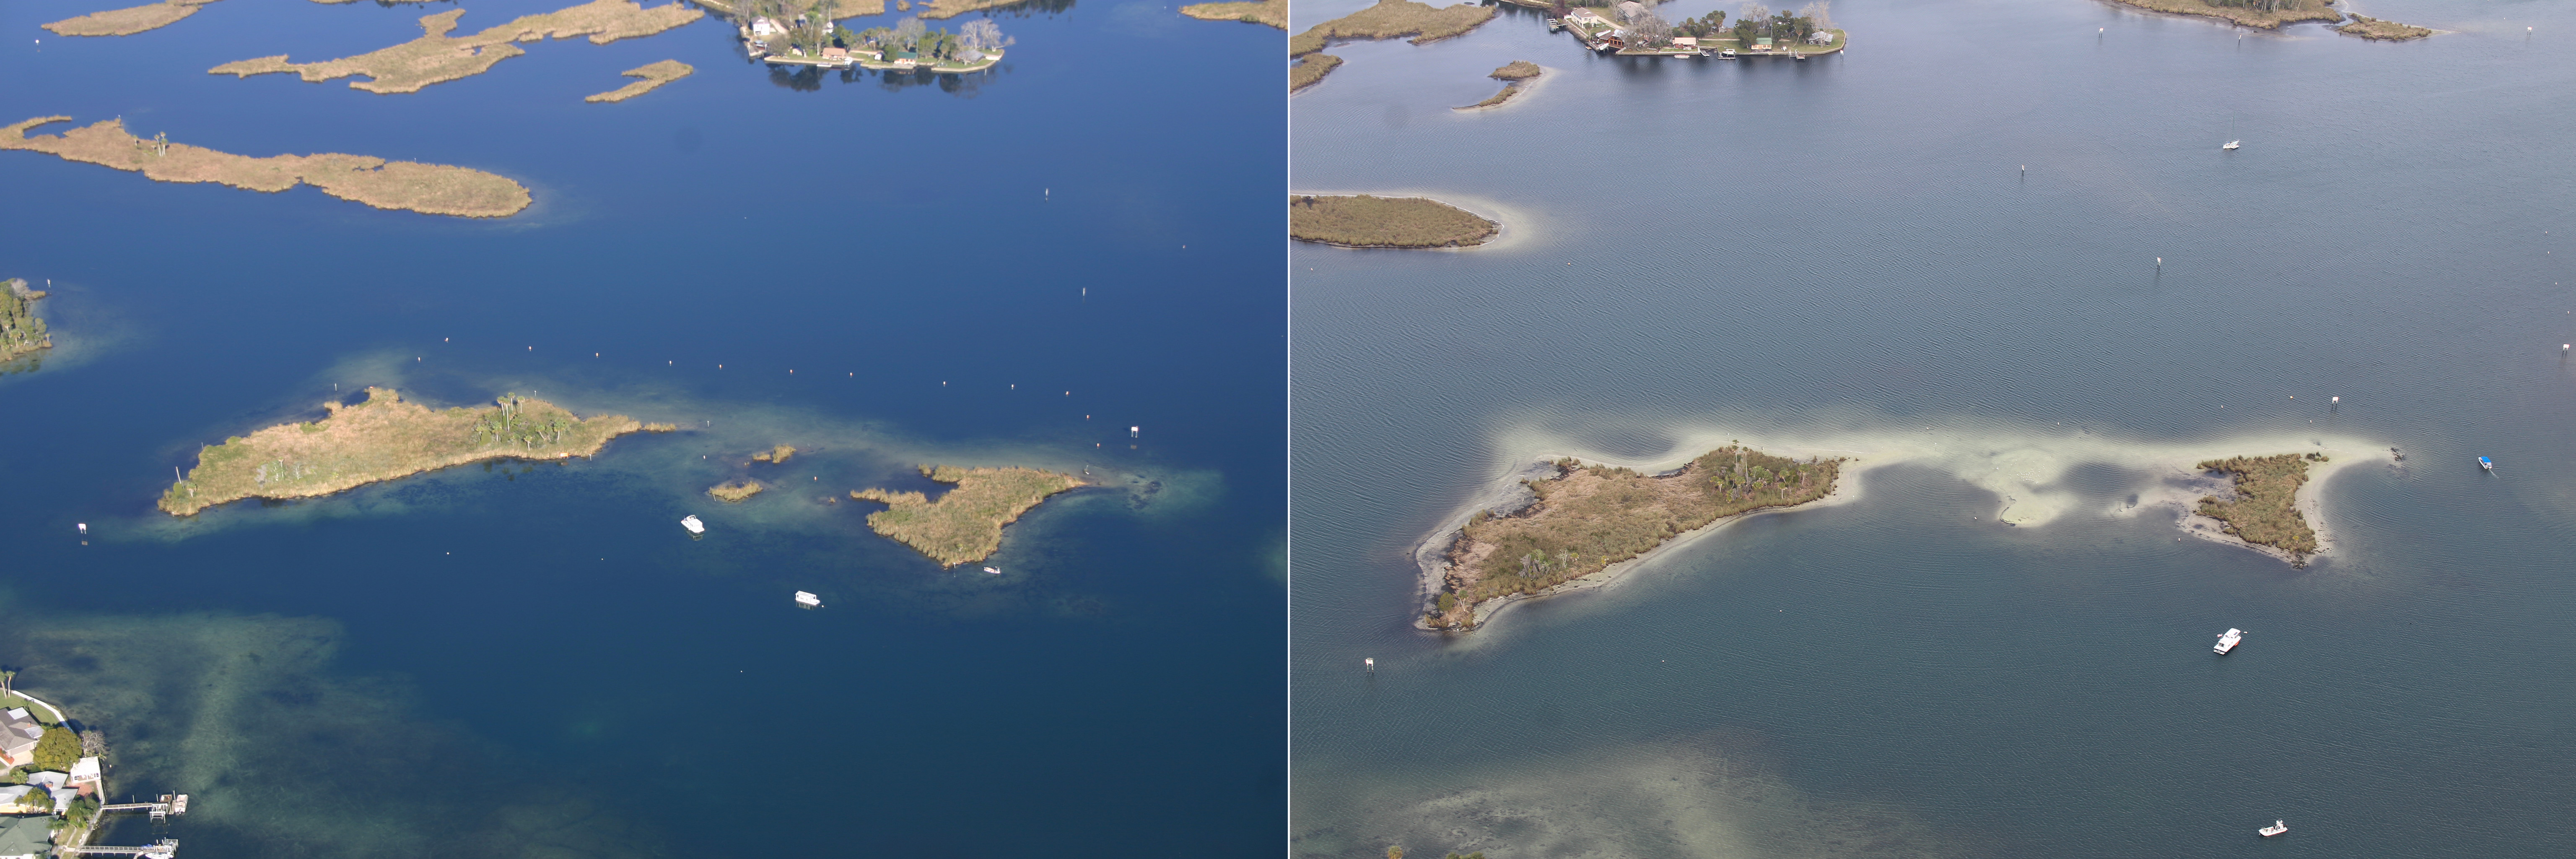 Two side-by-side aerial images of a forested island surrounded by teal ocean depicts the land shrinking in size as water fills in the space. 